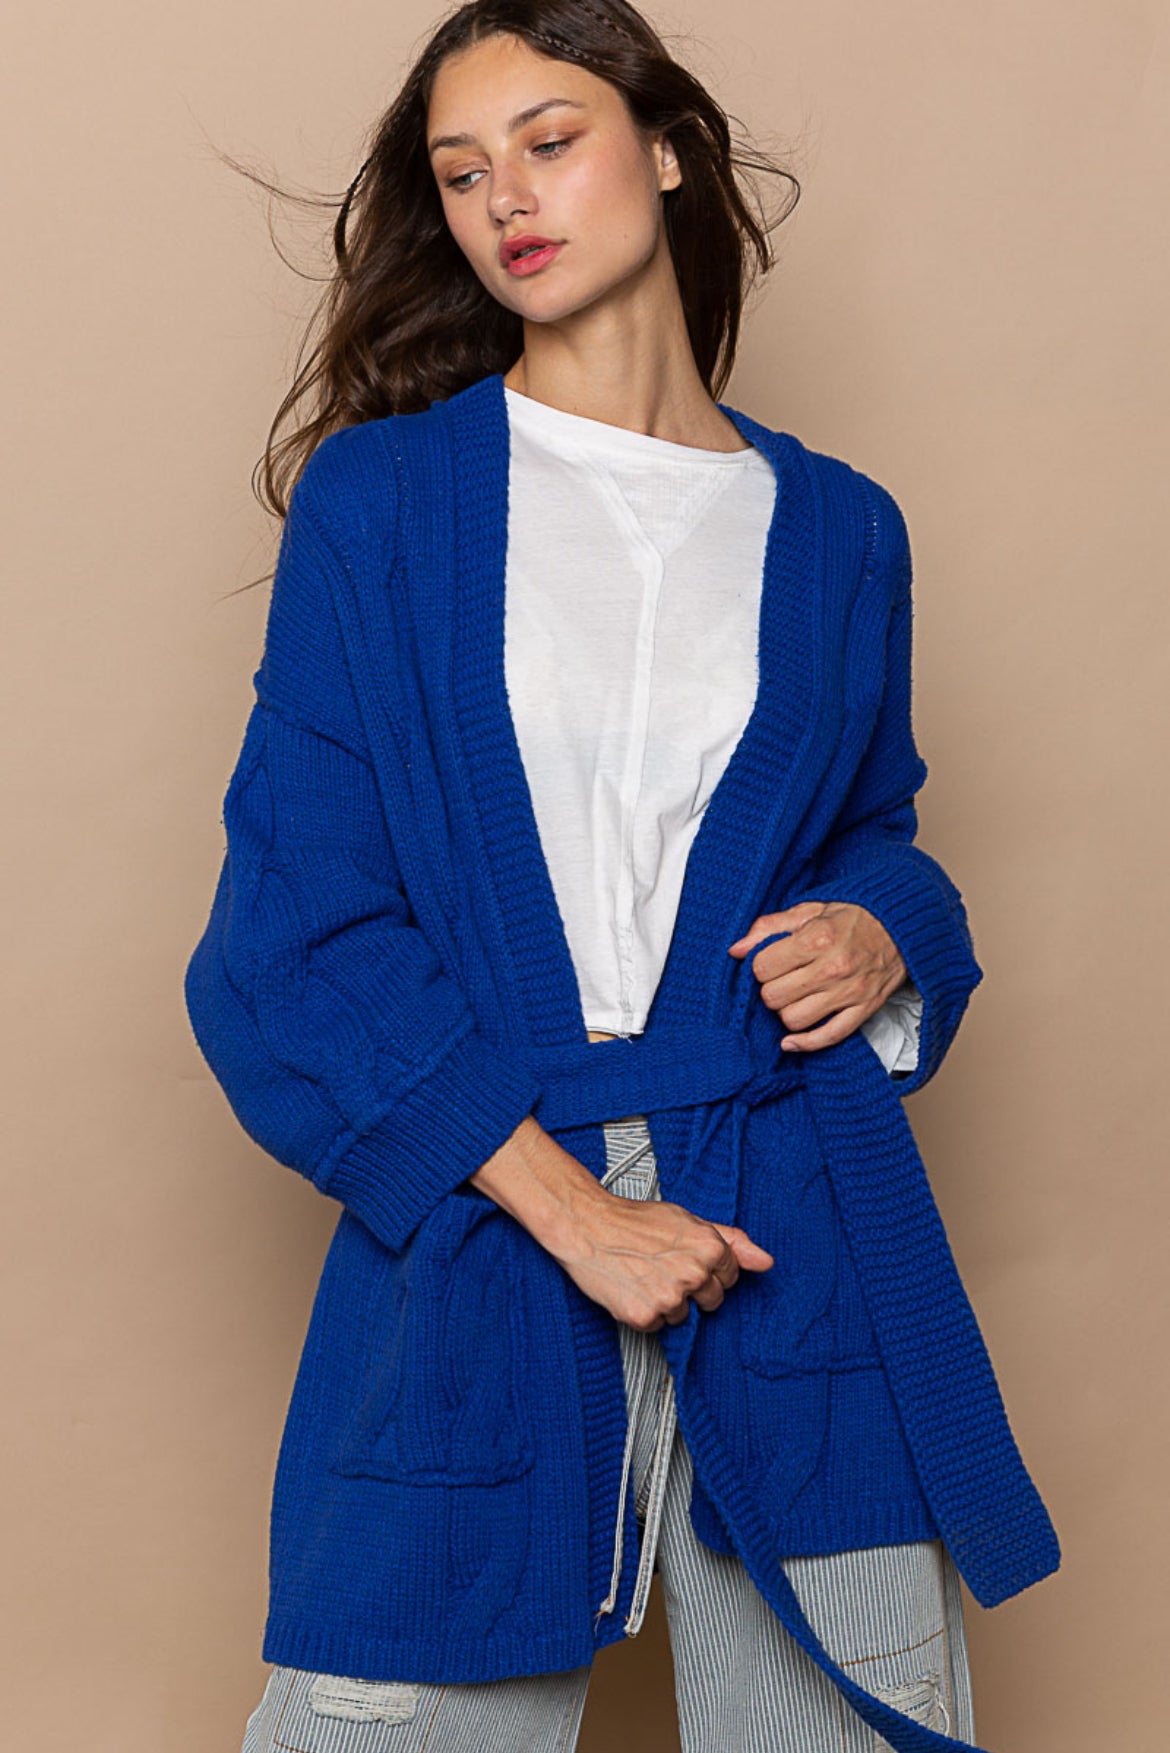 Blue cardigan sweater, relaxed fit, dropped shoulders, long sleeves, open front with waist tie wrap, pockets, kimono silhouette.